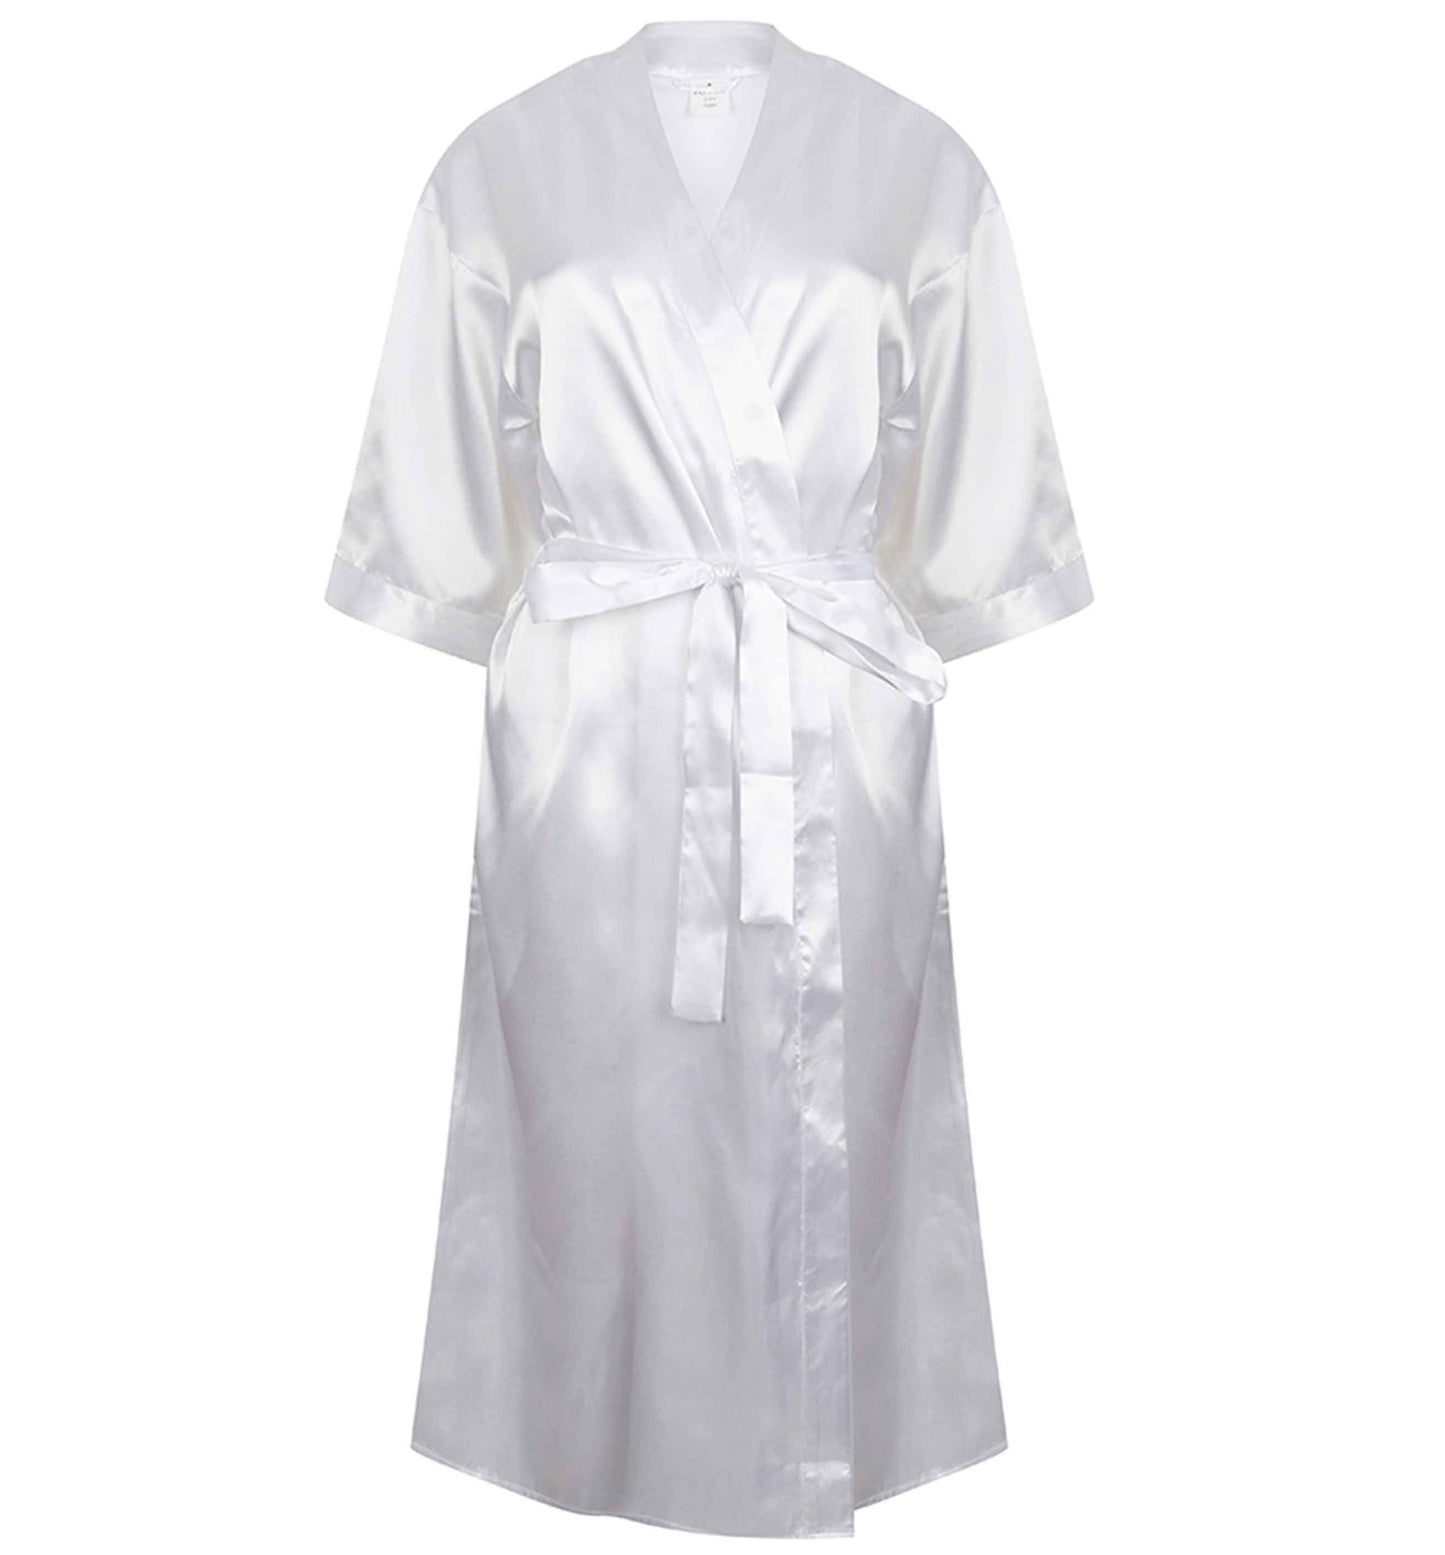 Kiss her before she marries her mr! | 8-18 | Kimono style satin robe | Ladies dressing gown